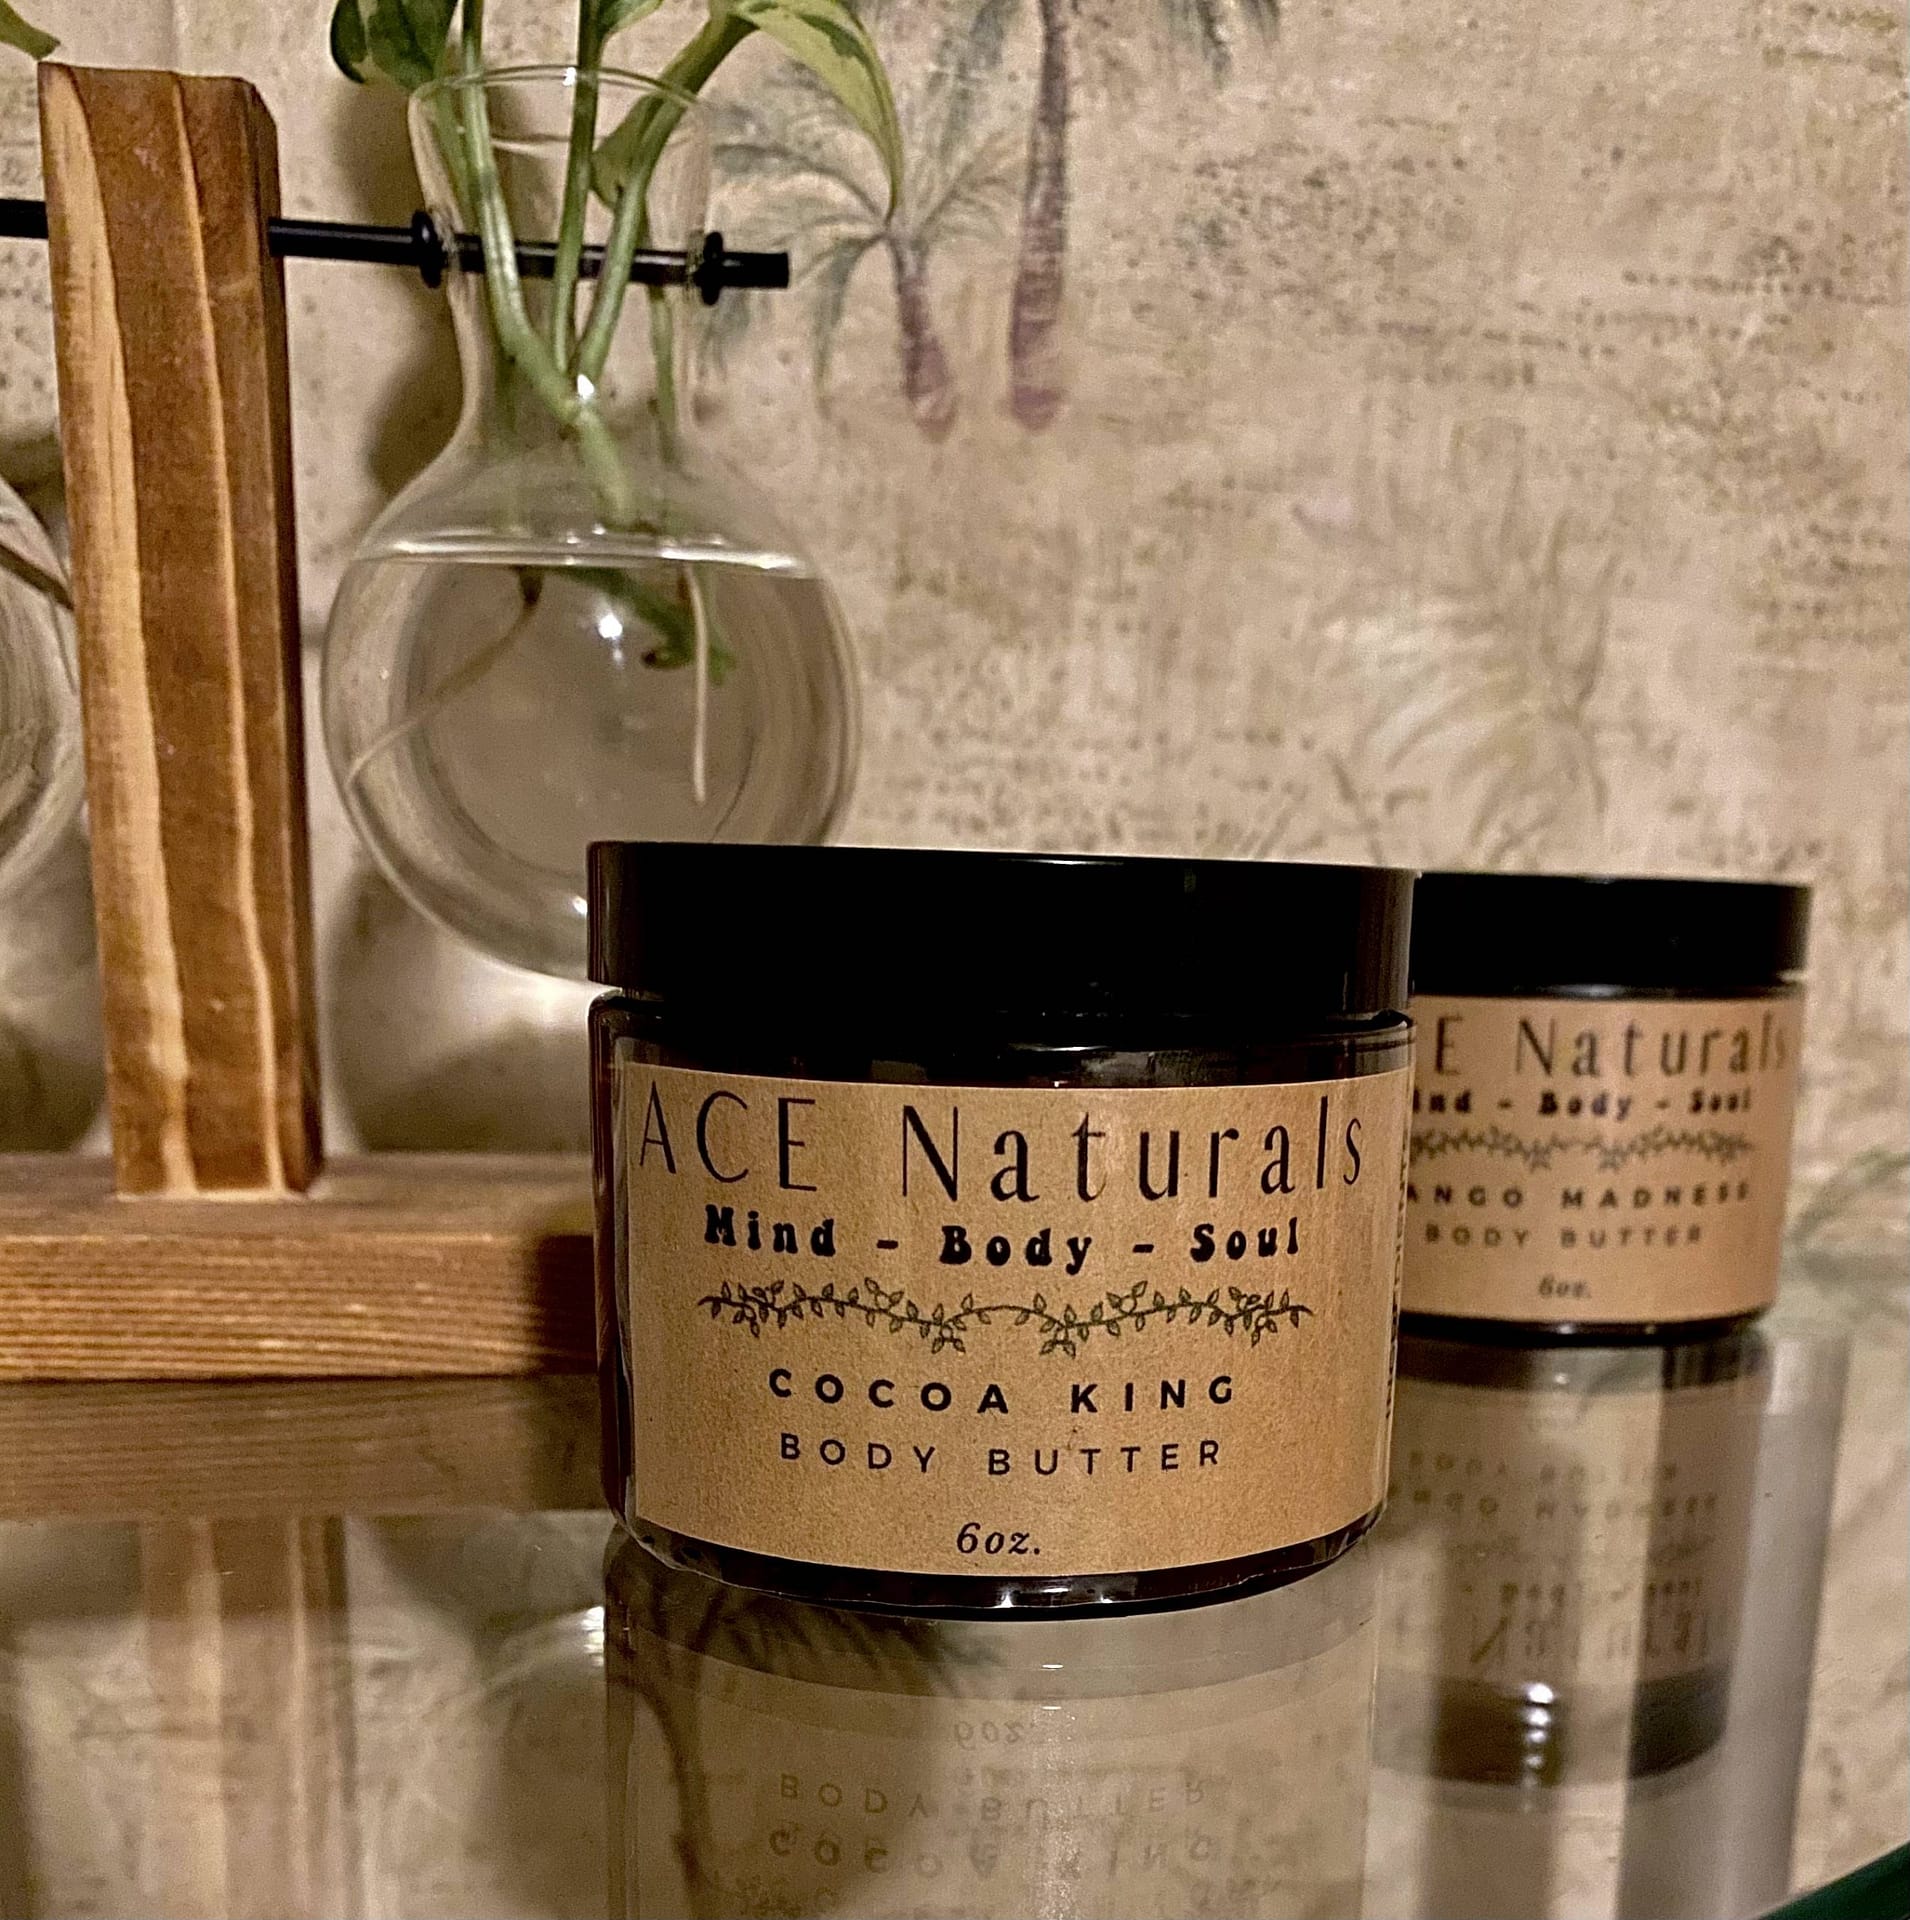 Cocoa King Body Butter-Ace Naturals